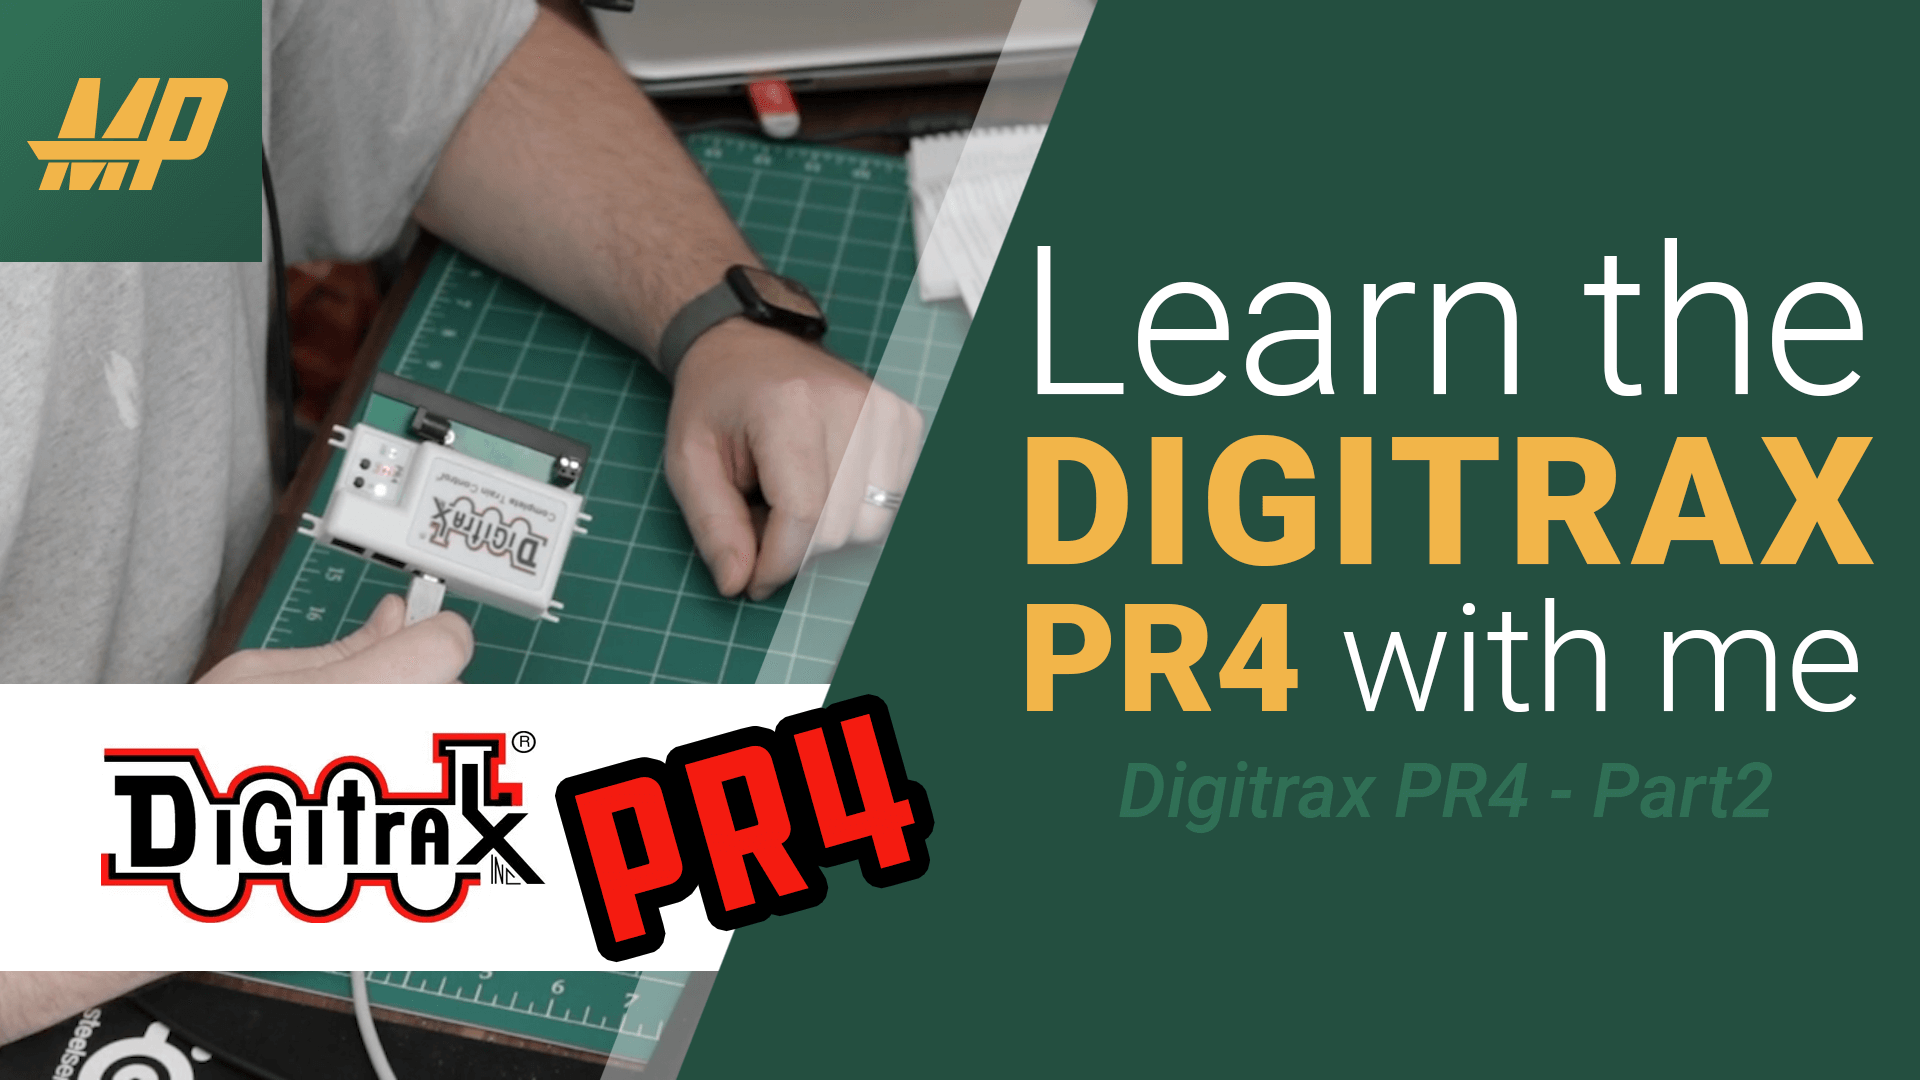 Learn the Digitrax PR4 – Part 2